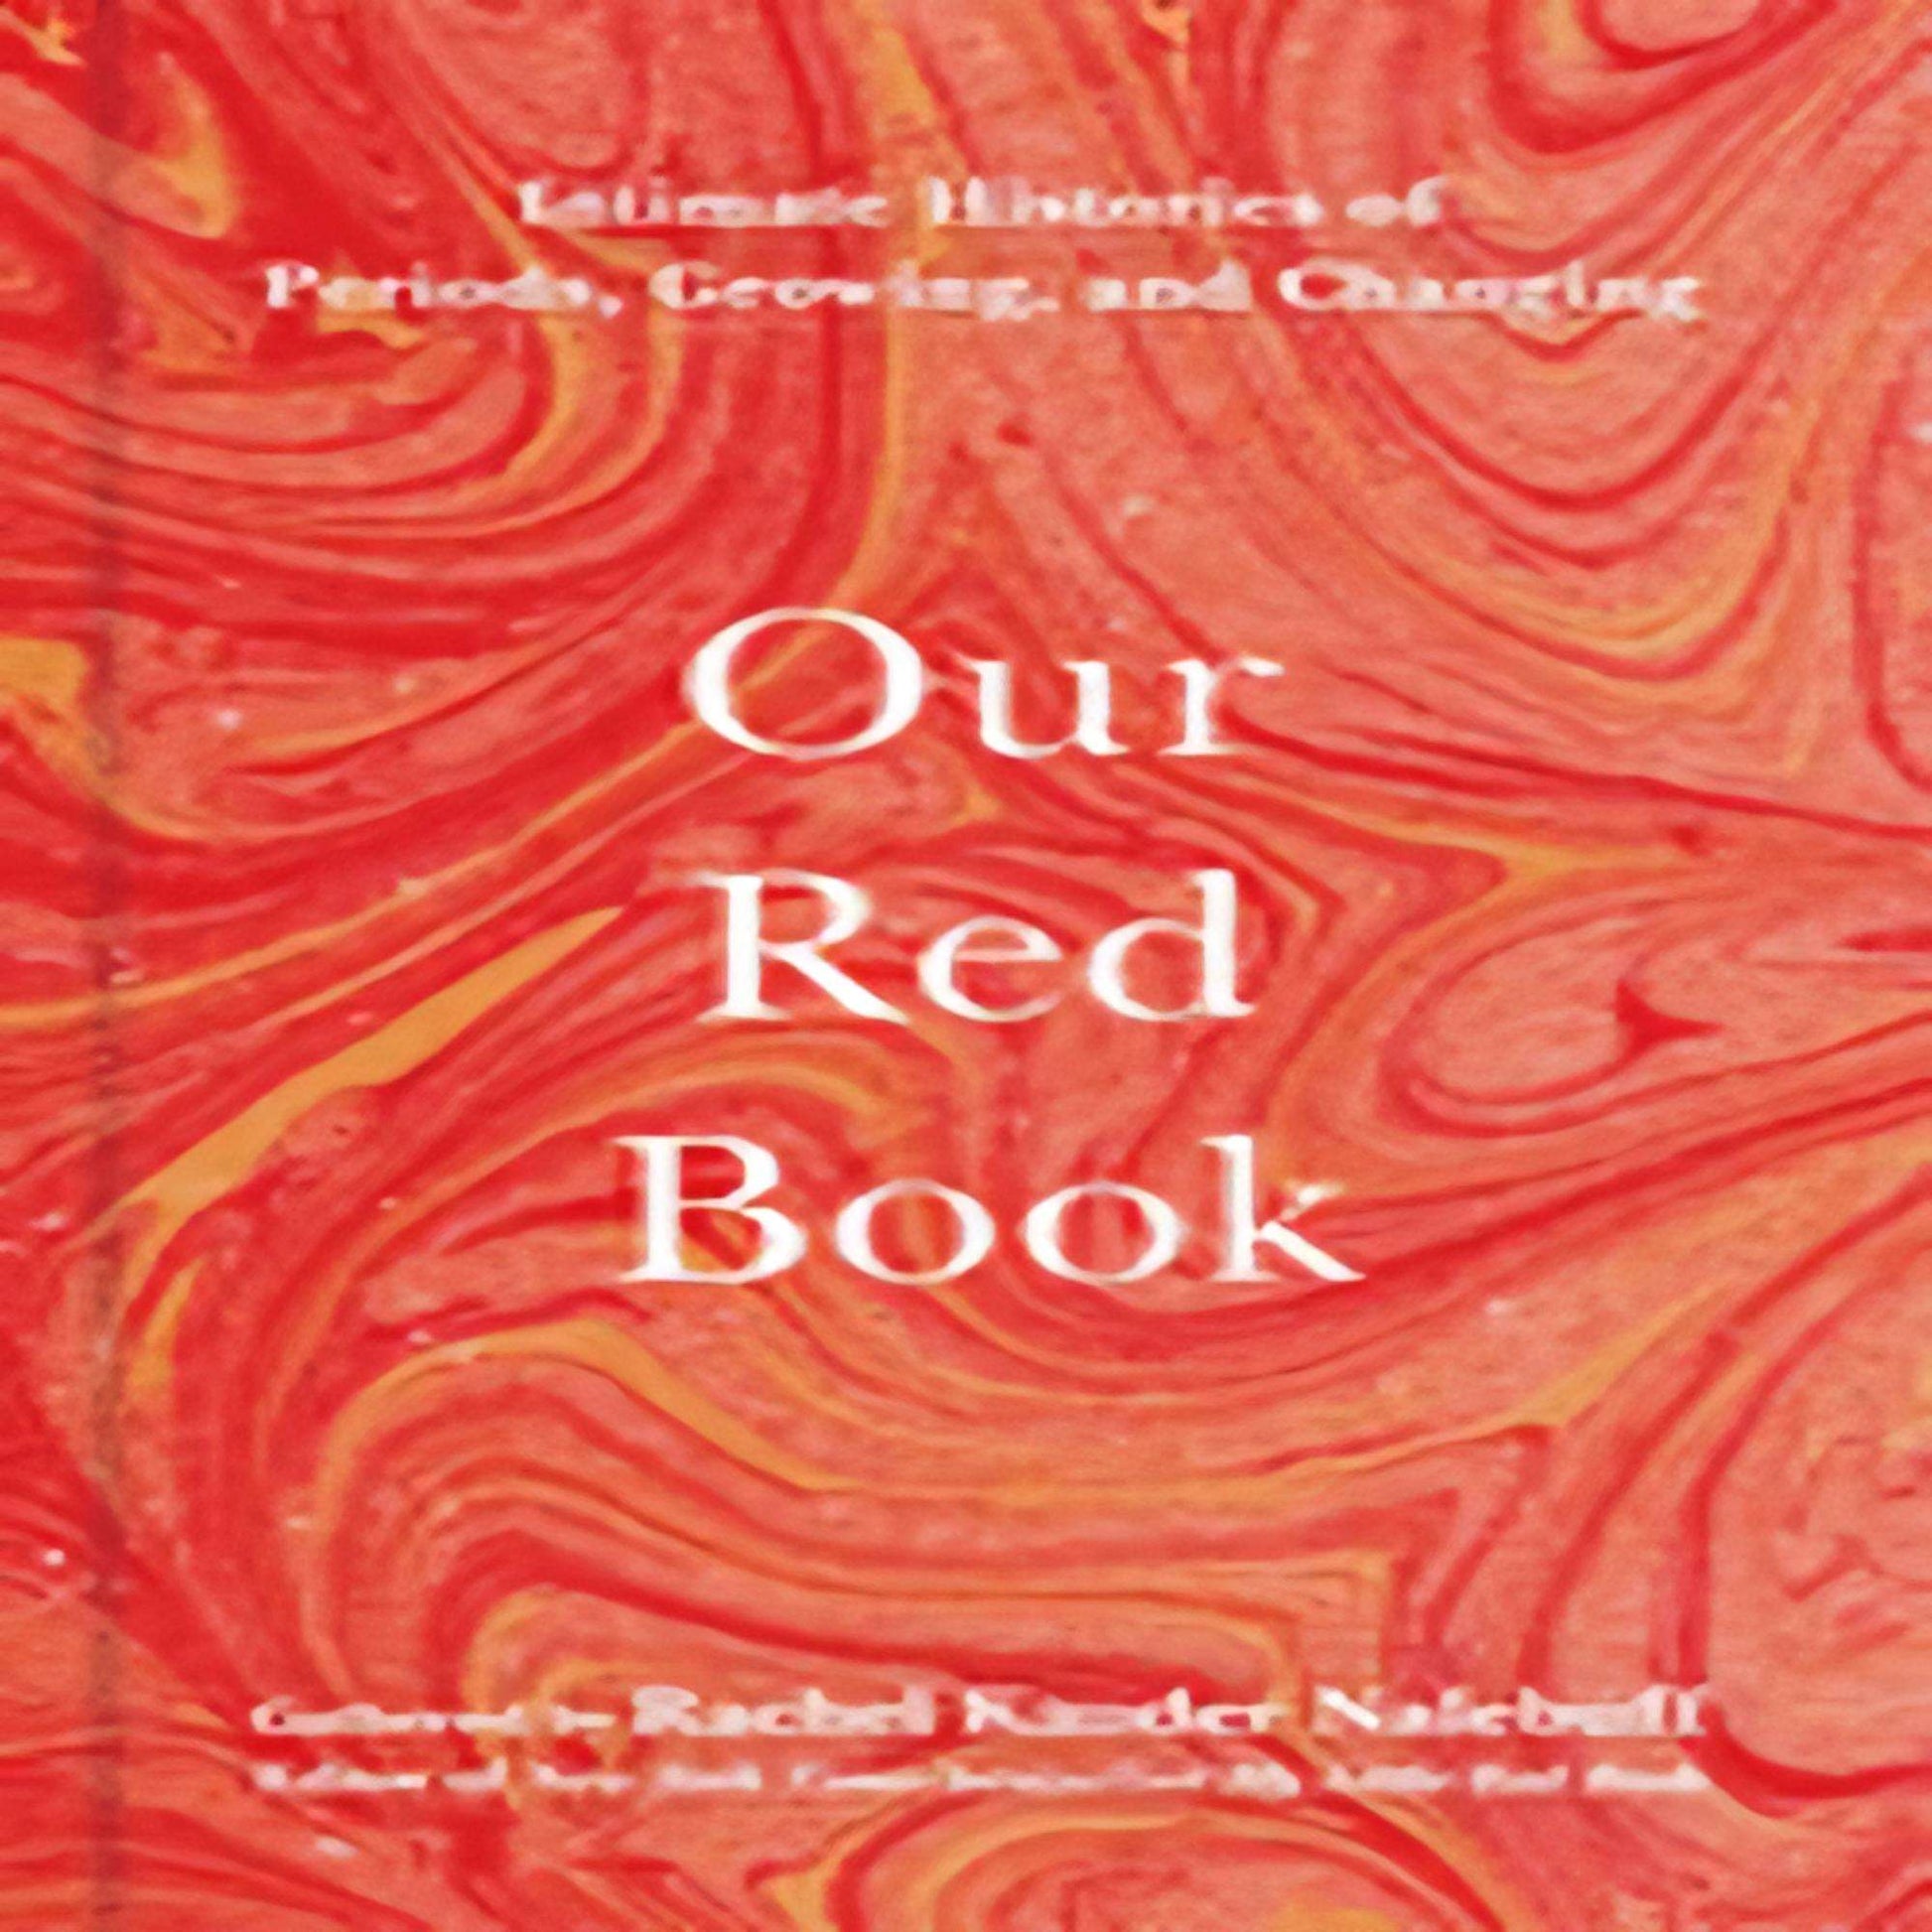 TEXTBOOK Our Red Book: Intimate Histories of Periods, Growing & Changing53-012523-198216865XDPGBOOKSTORE.COM. Today's Bestsellers.